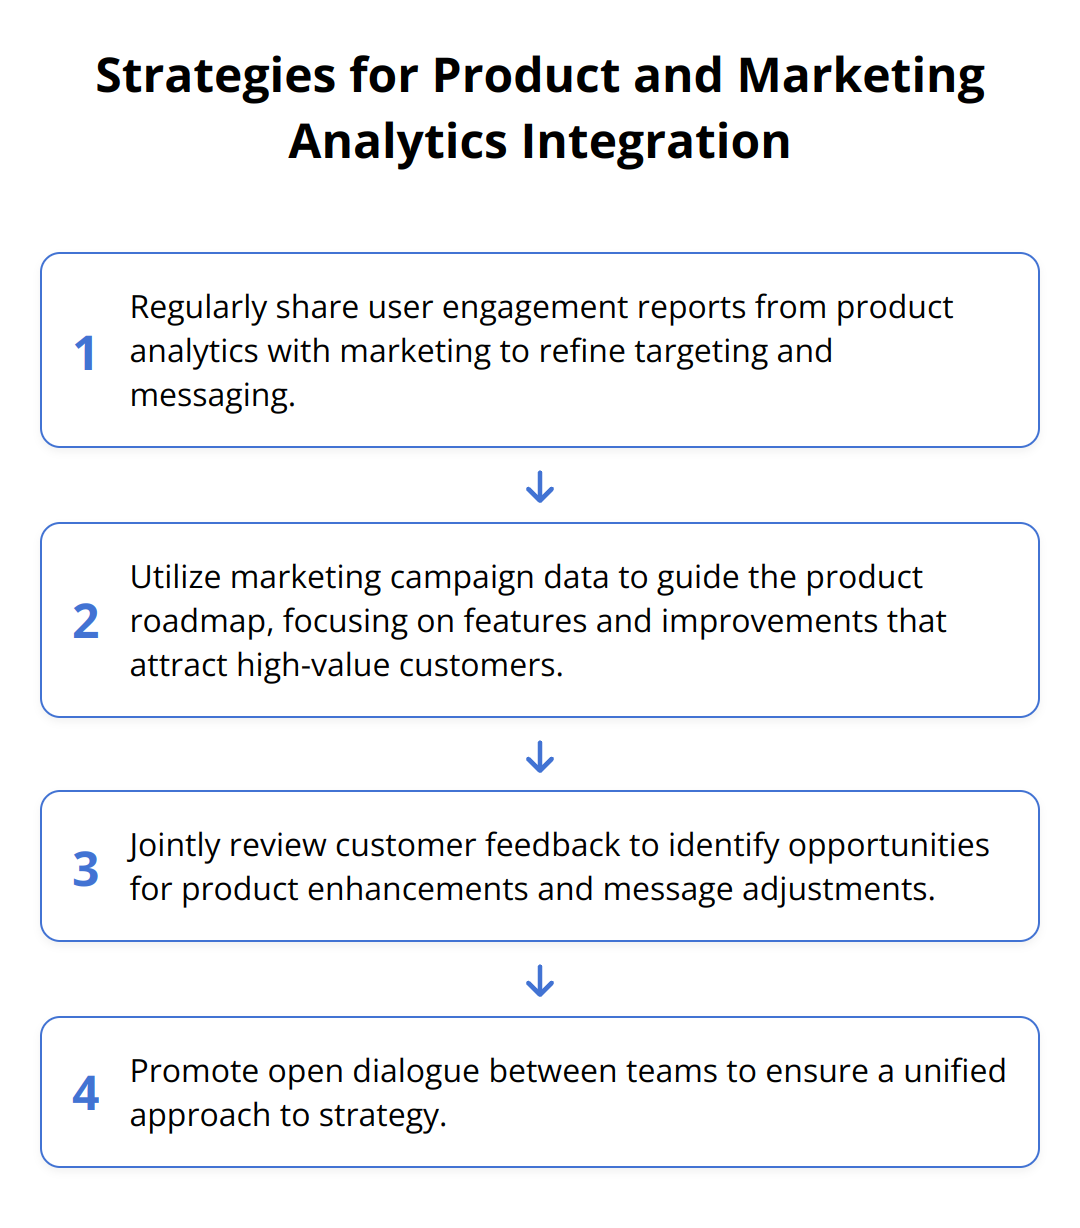 Flow Chart - Strategies for Product and Marketing Analytics Integration